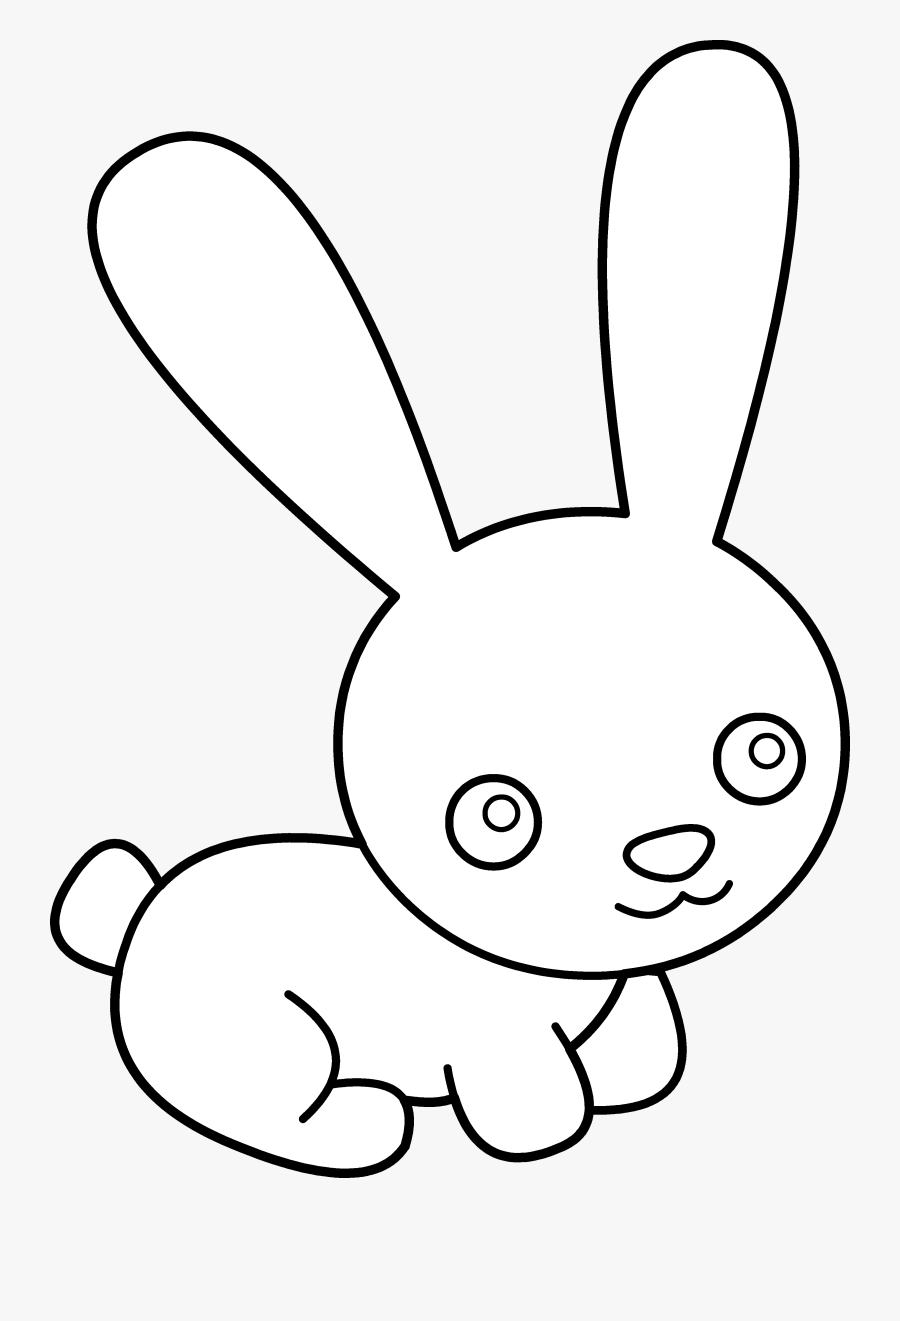 Bunnies Clipart Black And White, Transparent Clipart